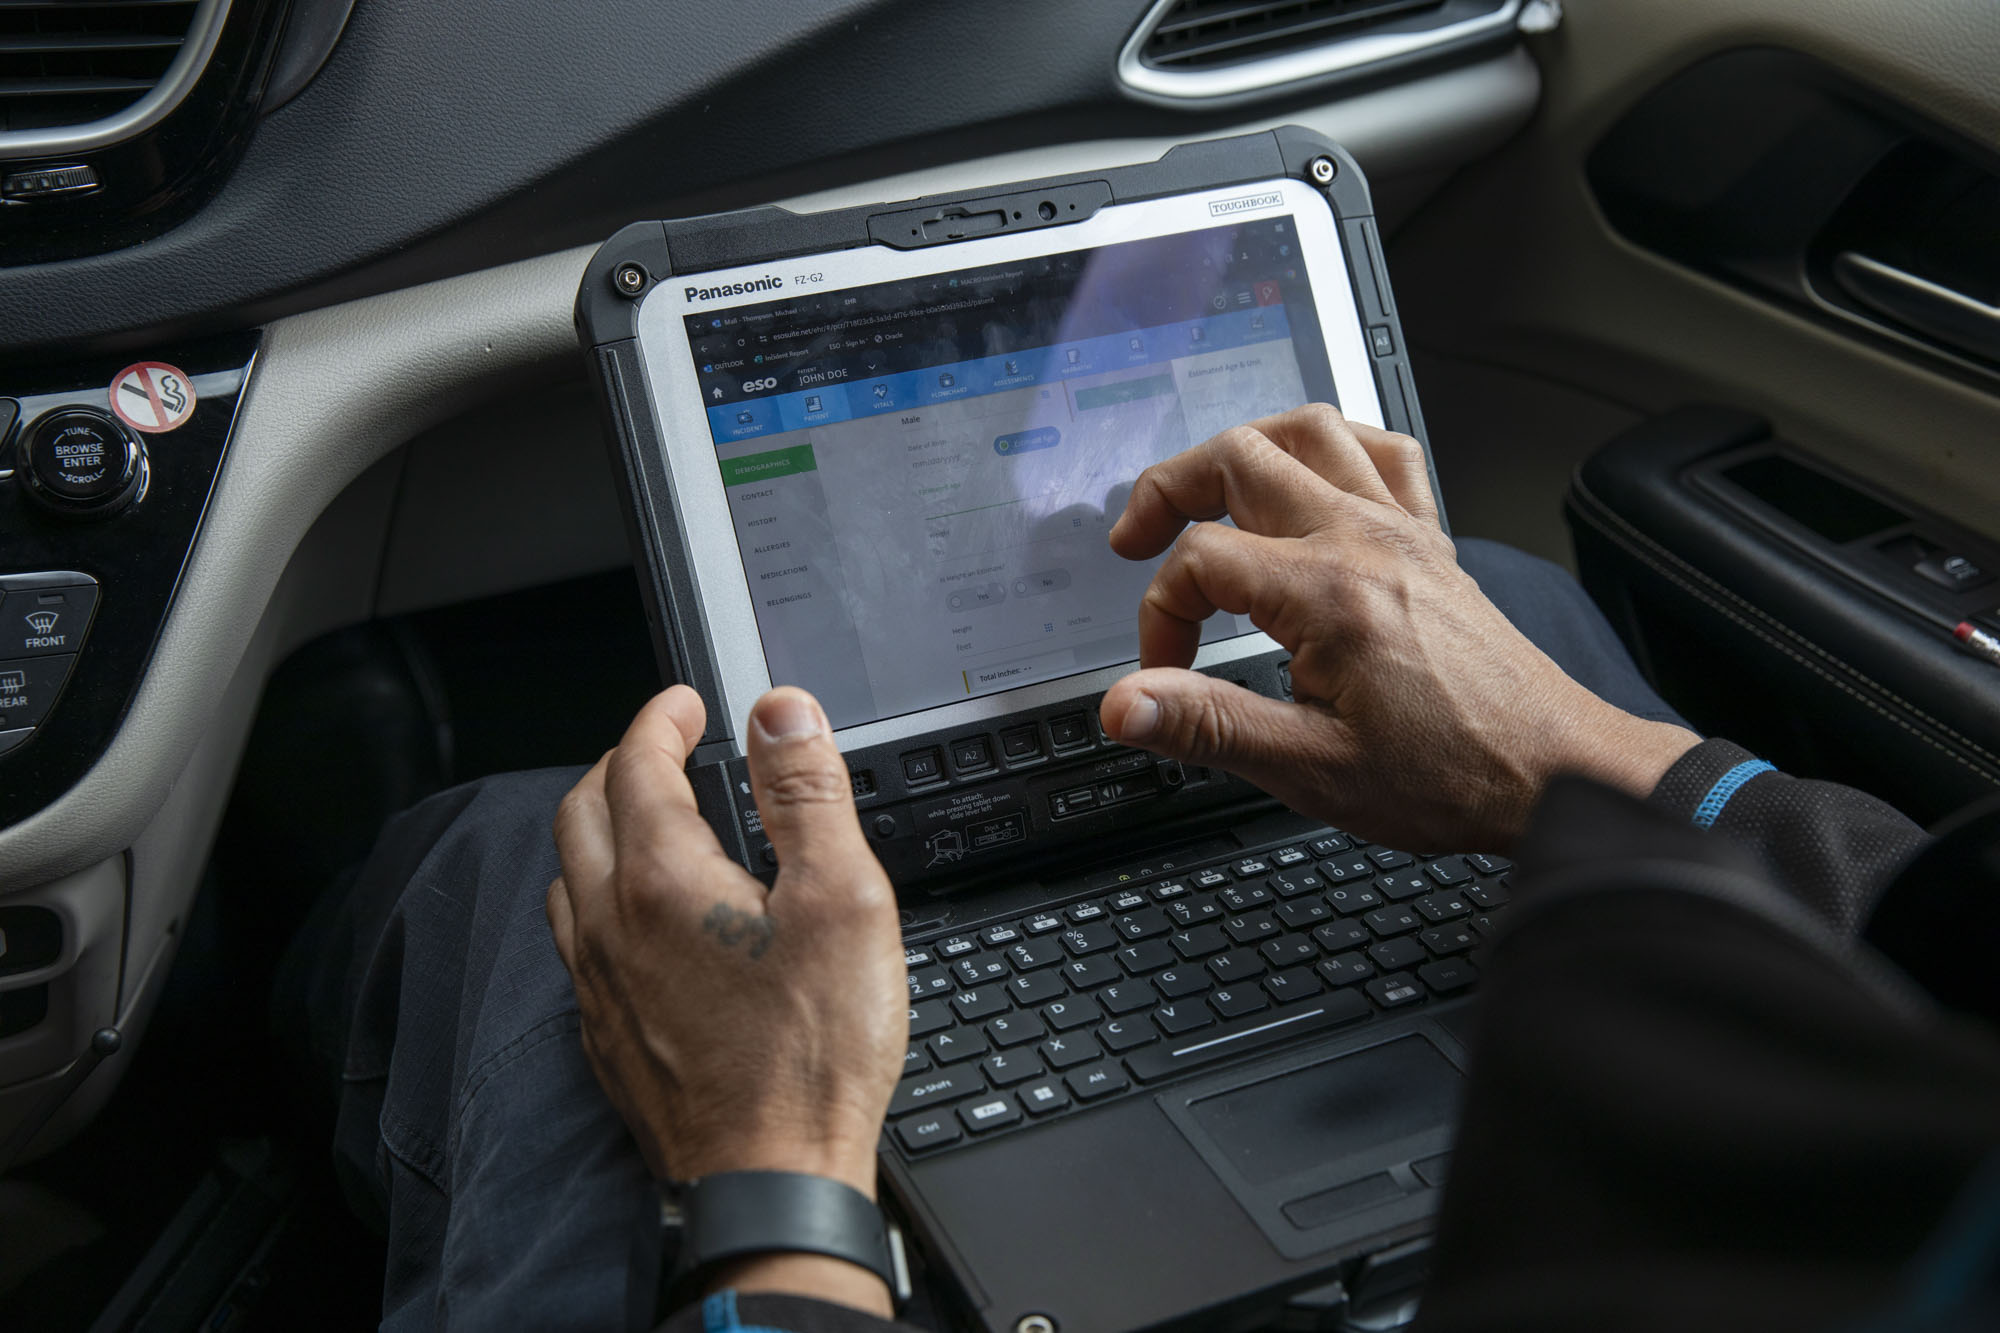 A person types into a laptop from the passenger seat of a car.